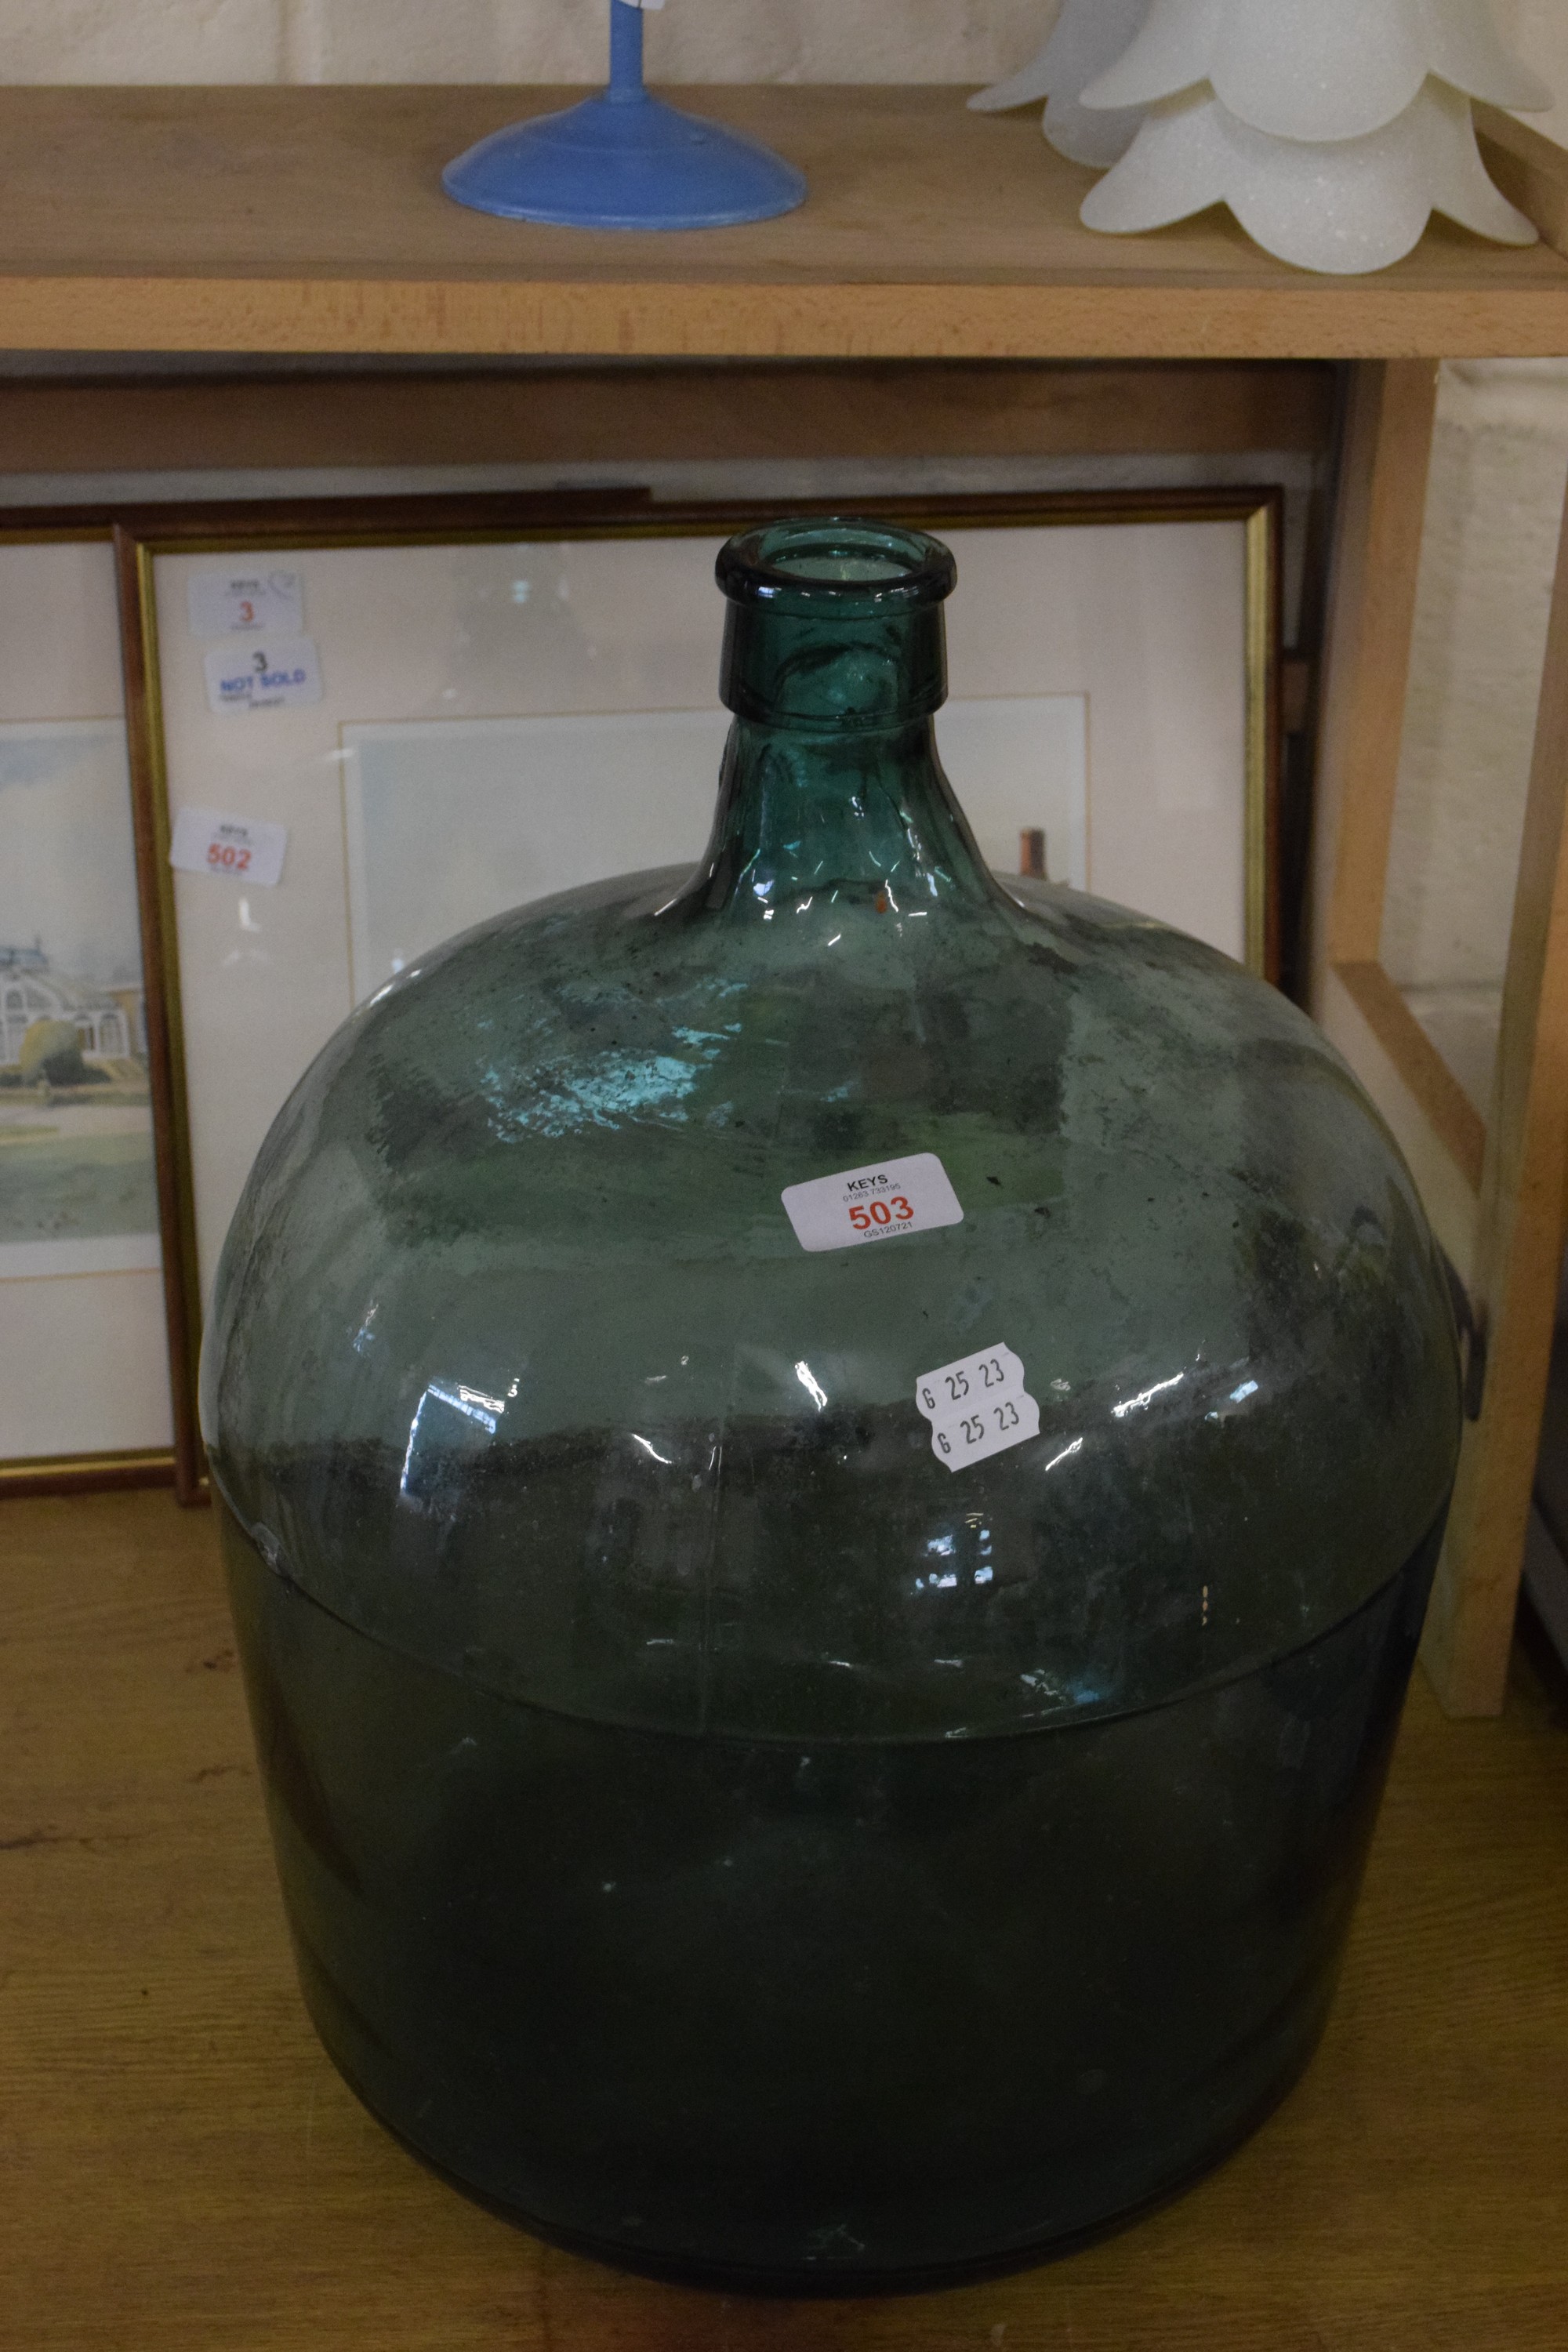 GLASS CARBOY